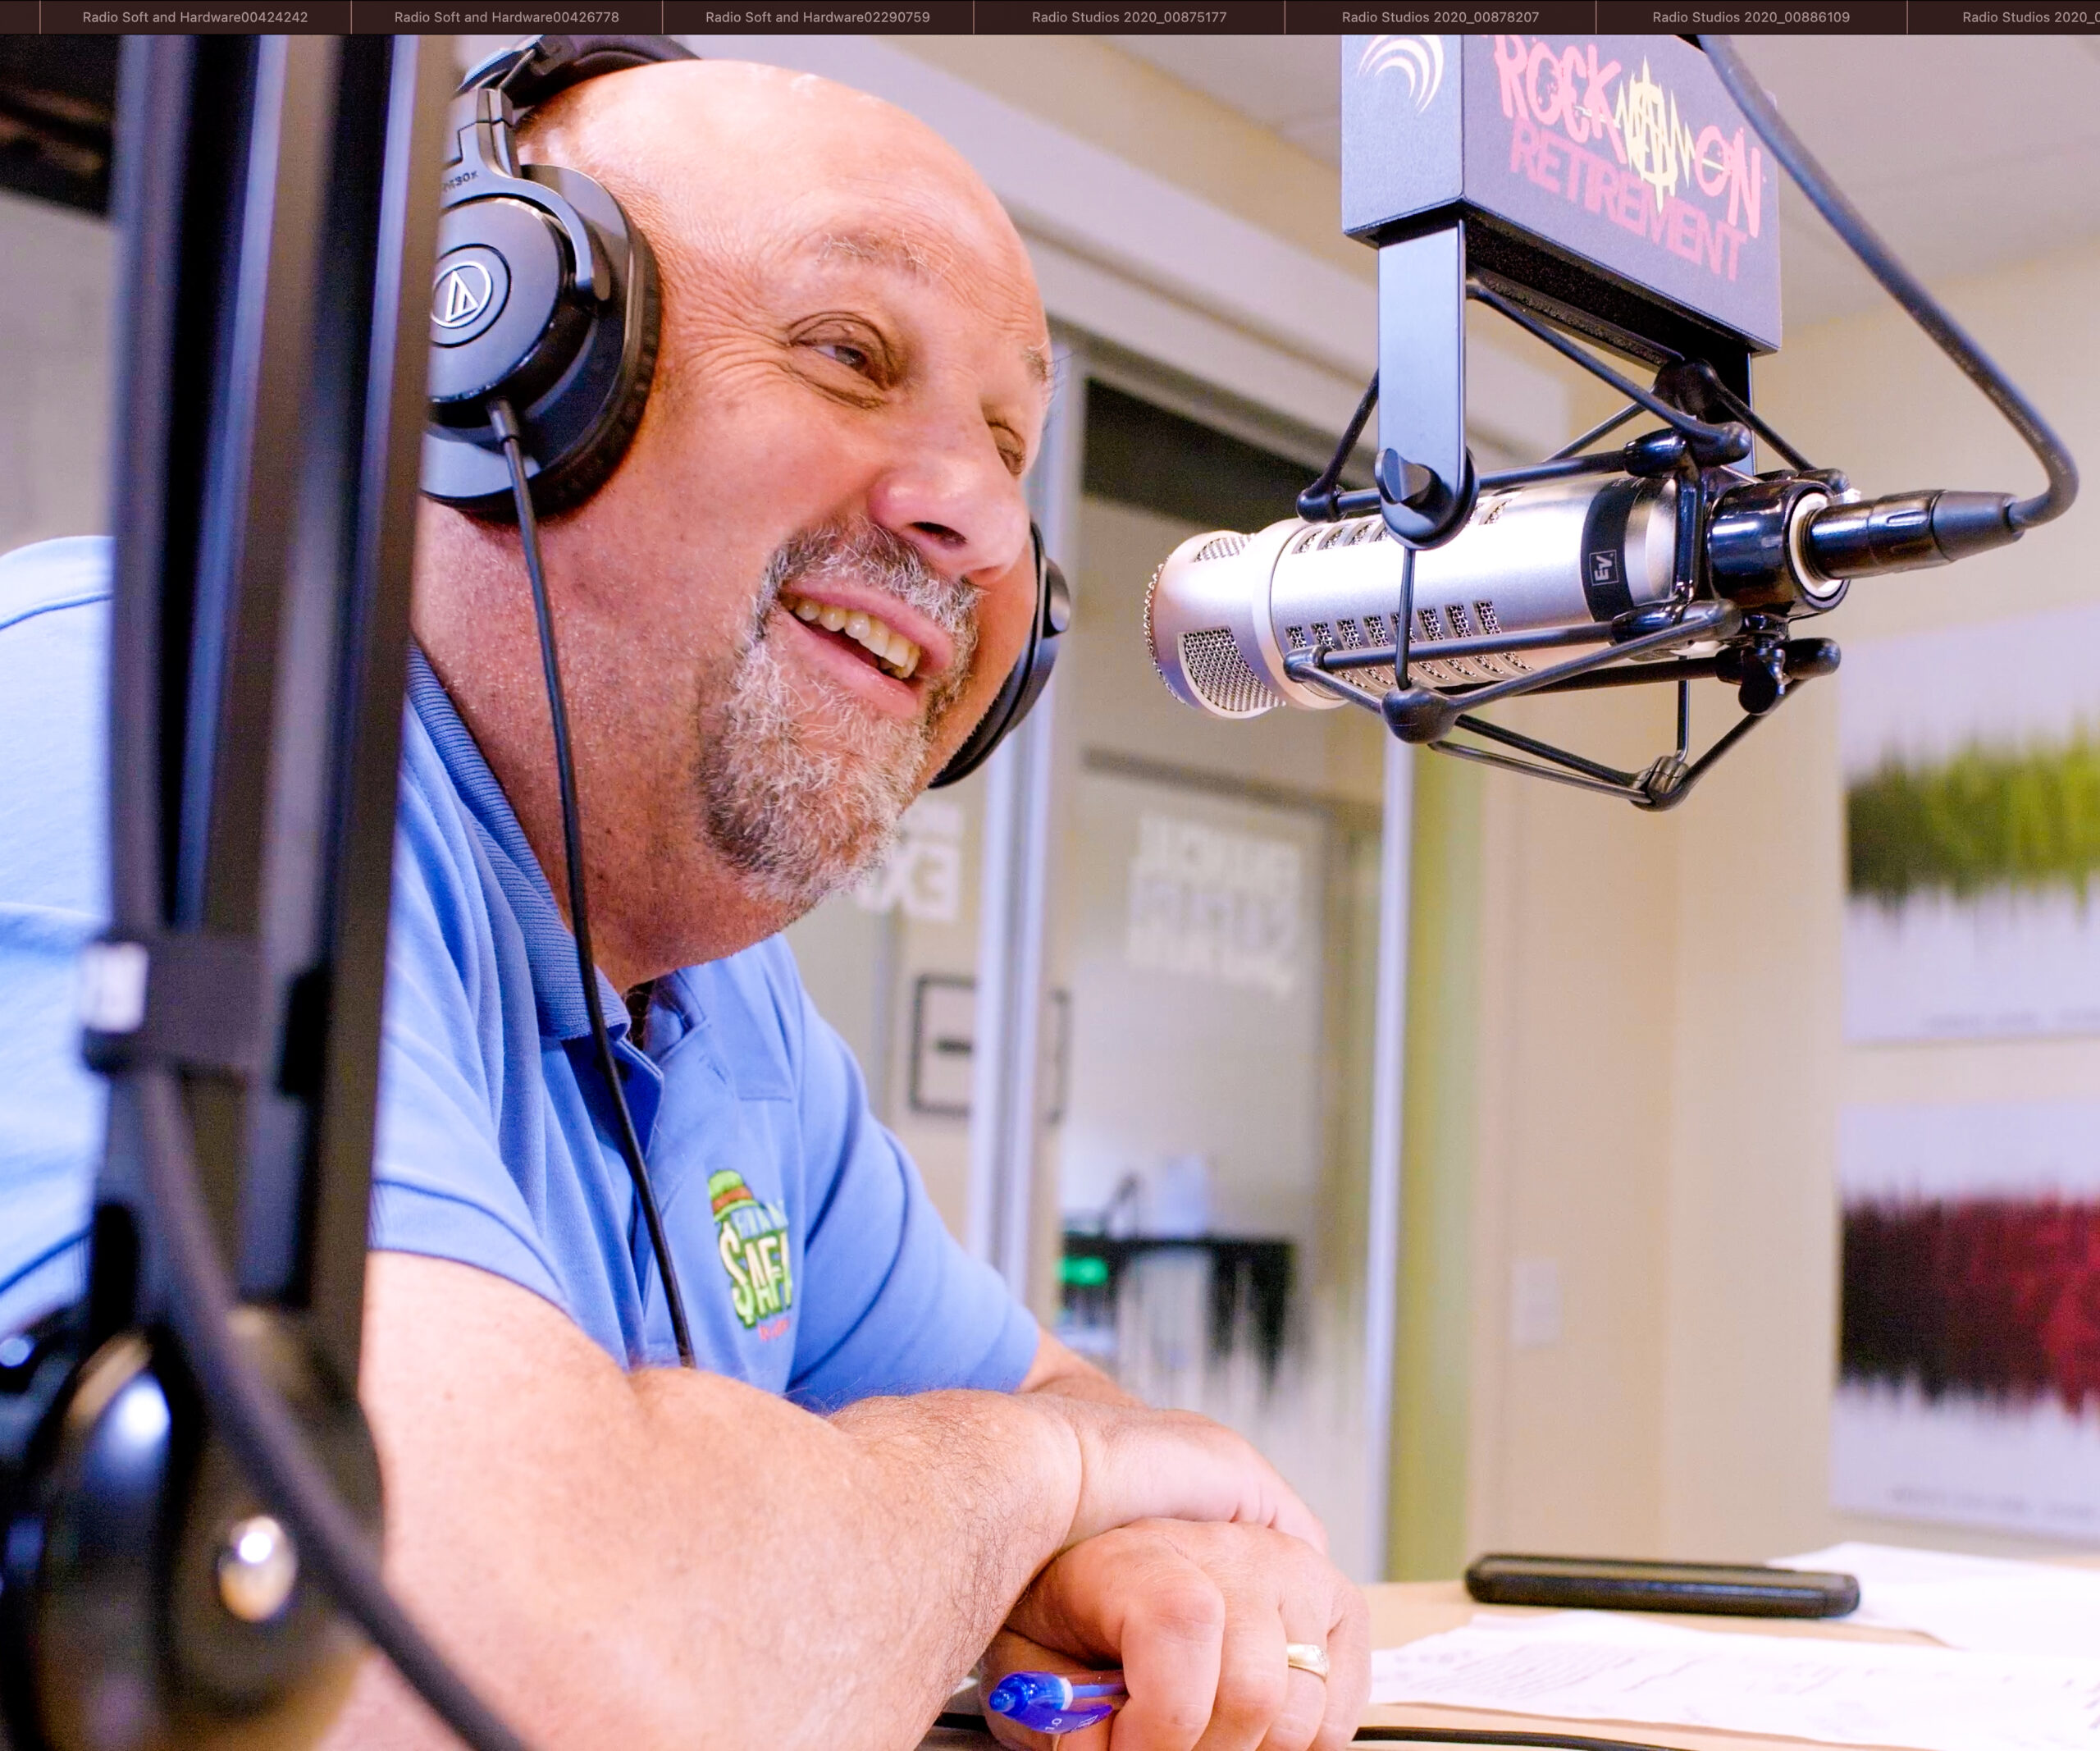 An experienced radio host in a large radio studio sitting behind a microphone.